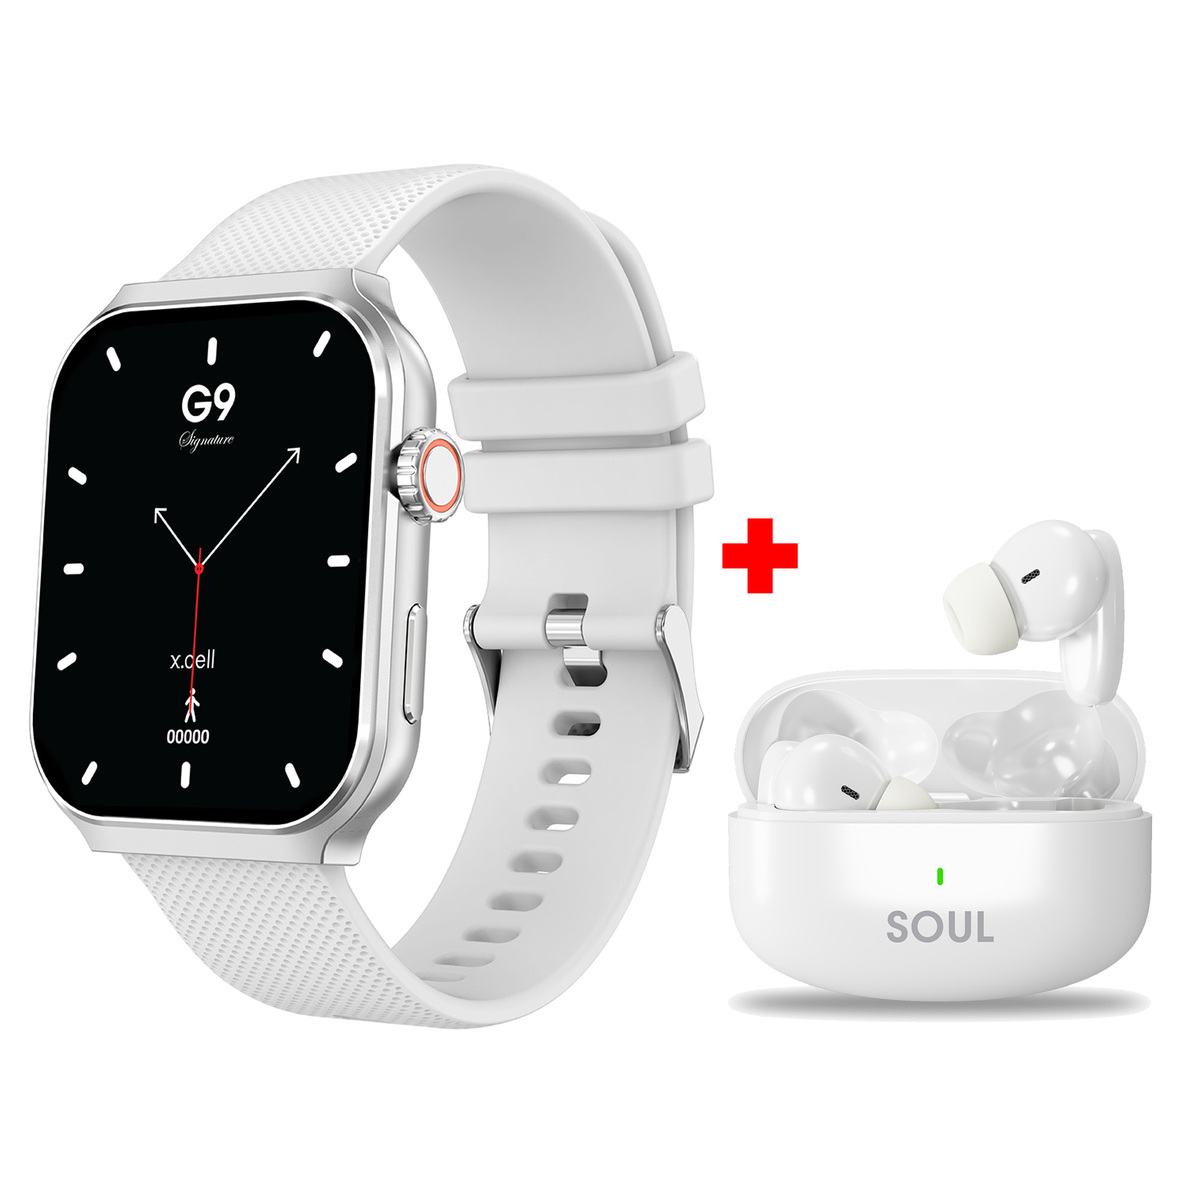 X.Cell Smart Watch G9 White + Earbuds Soul 14 Pro